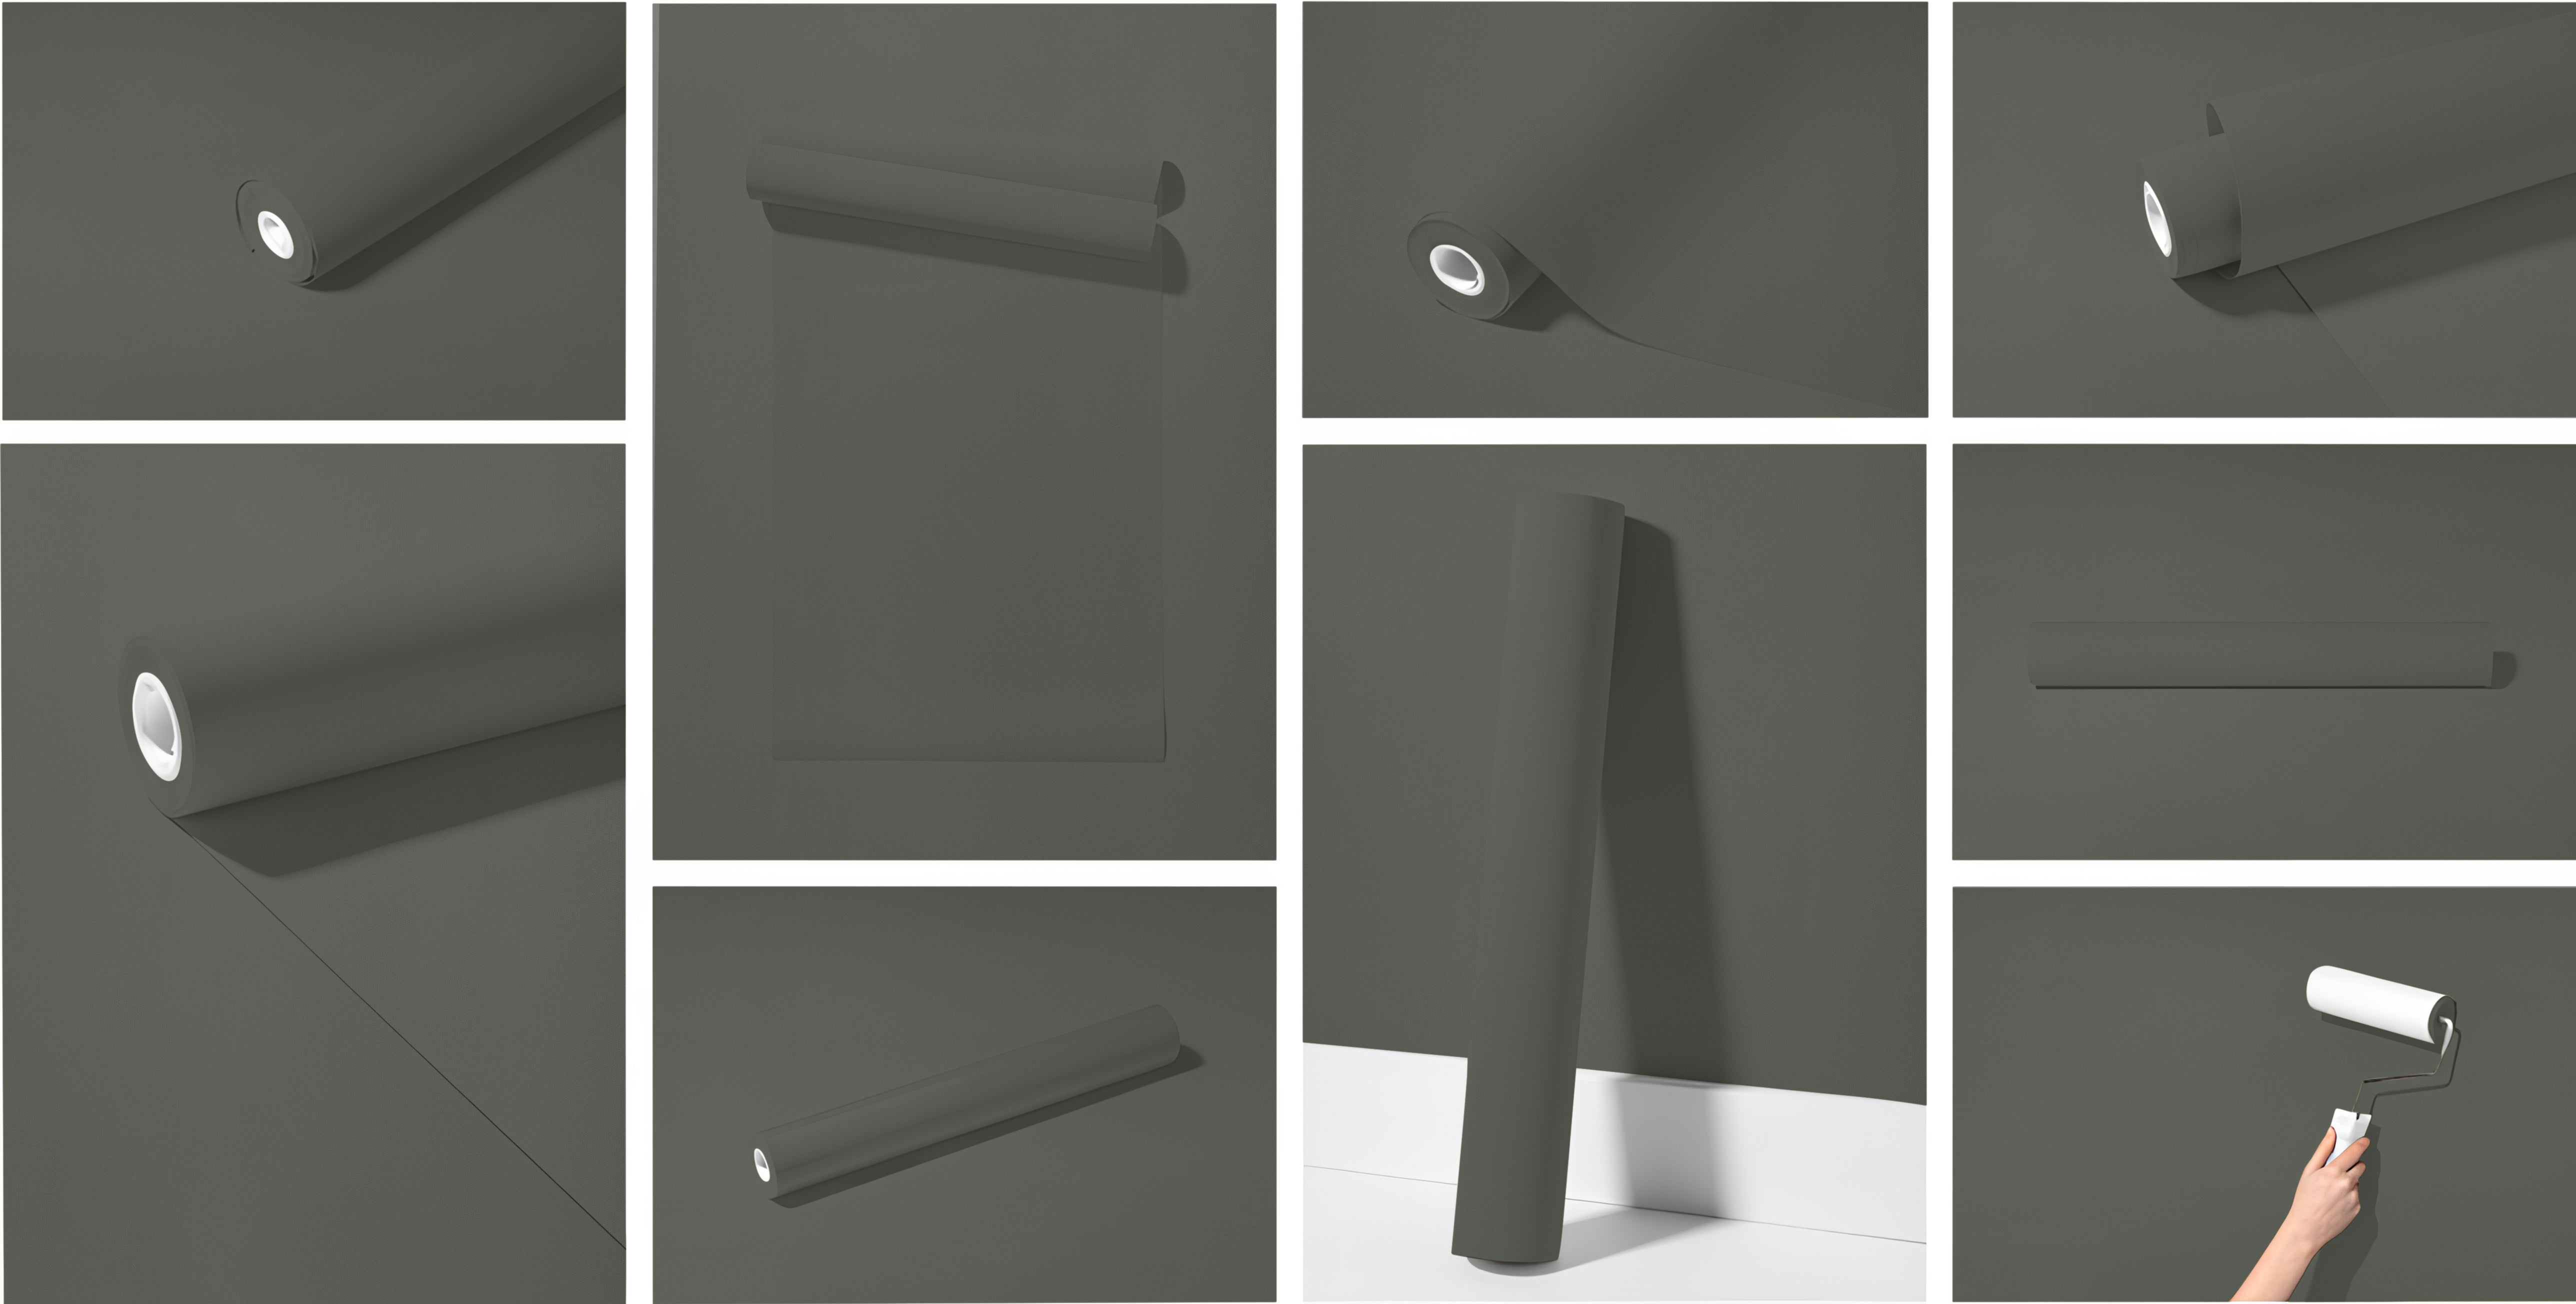 Peel & Stick Removable Re-usable Paint - Color RAL 7009 Green Grey - offRAL™ - RALRAW LLC, USA